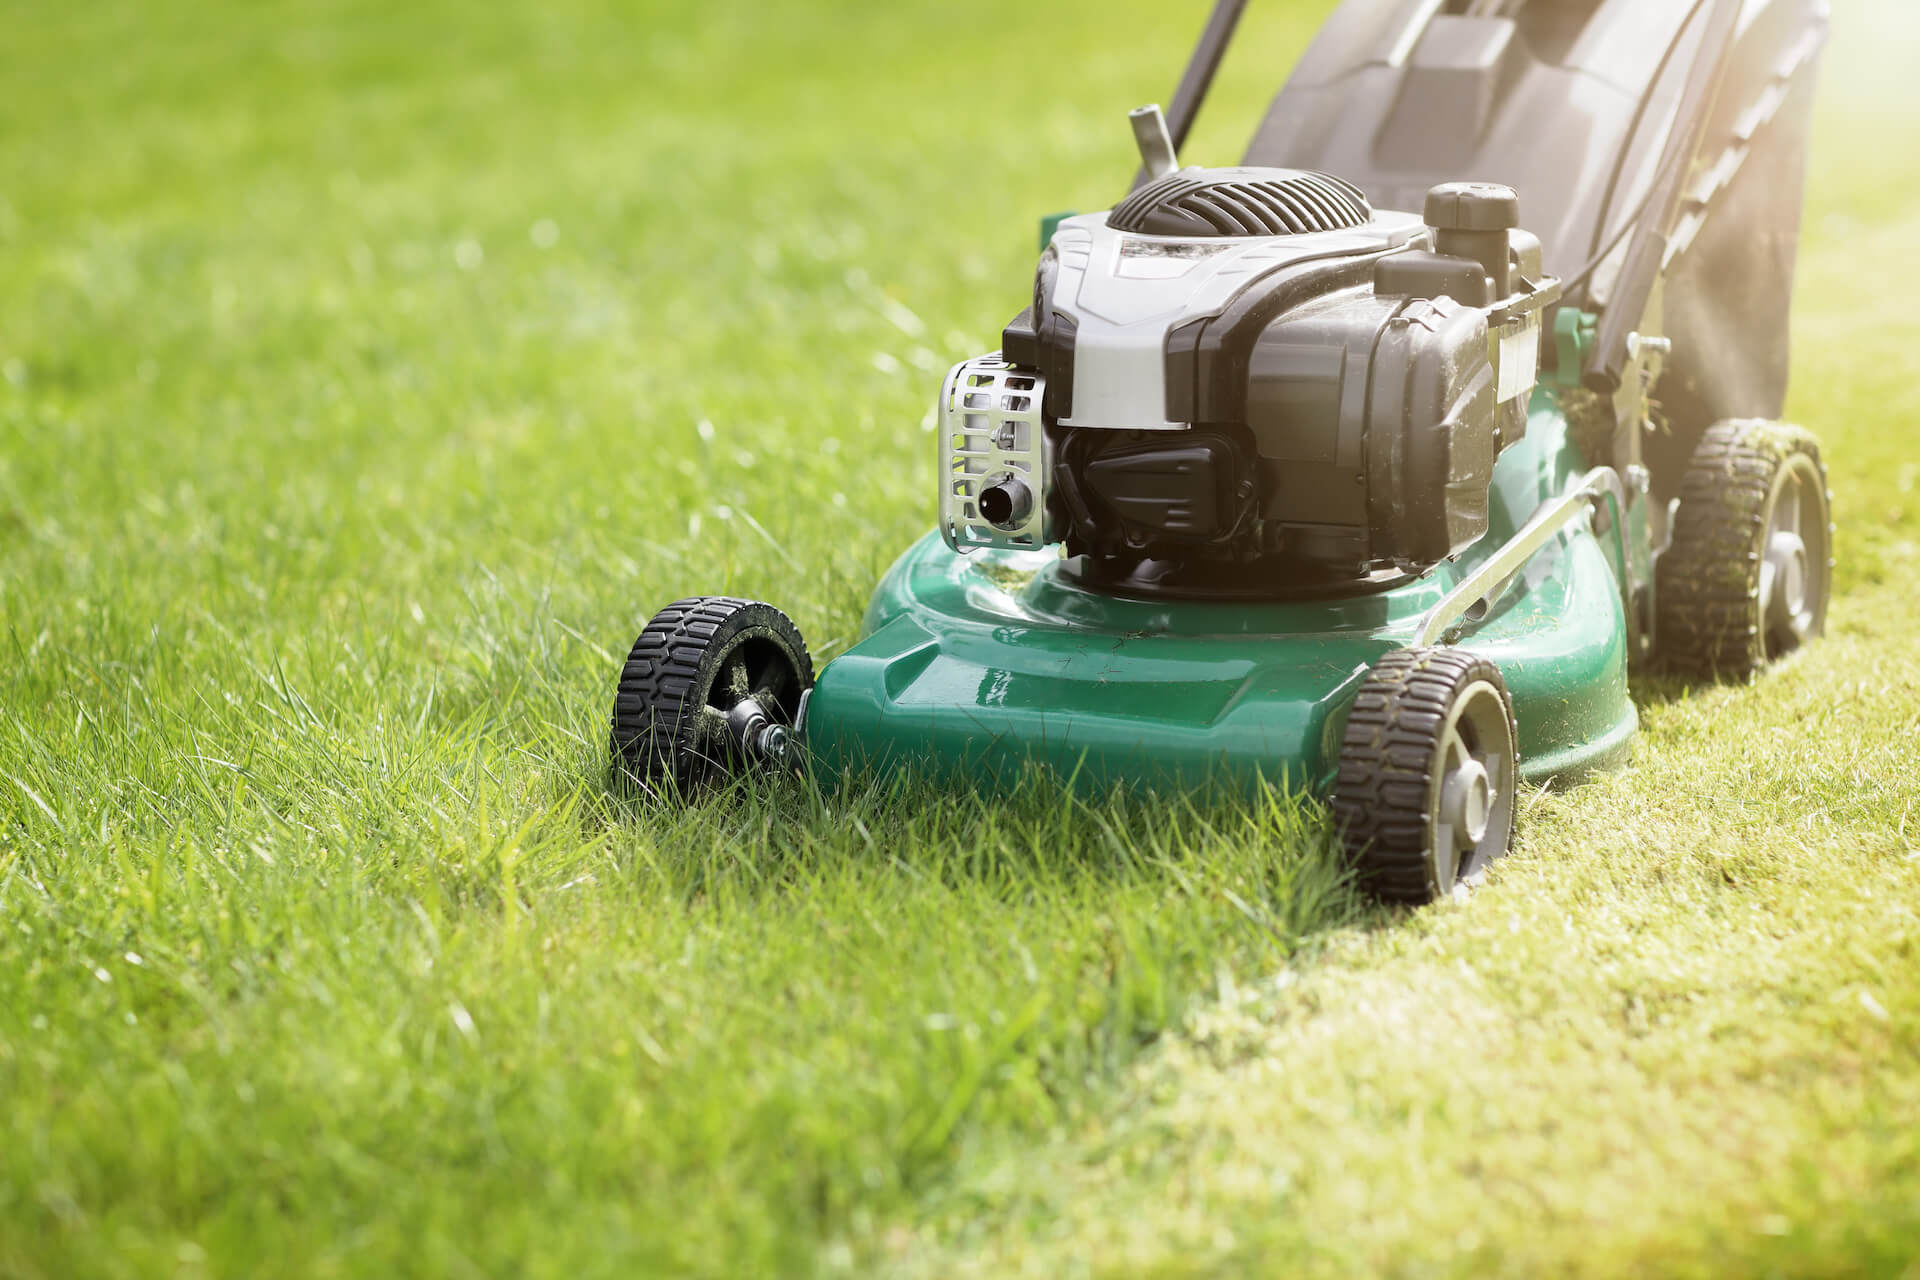 Is It Bad for A Lawn Mower to Run Out of Gas?